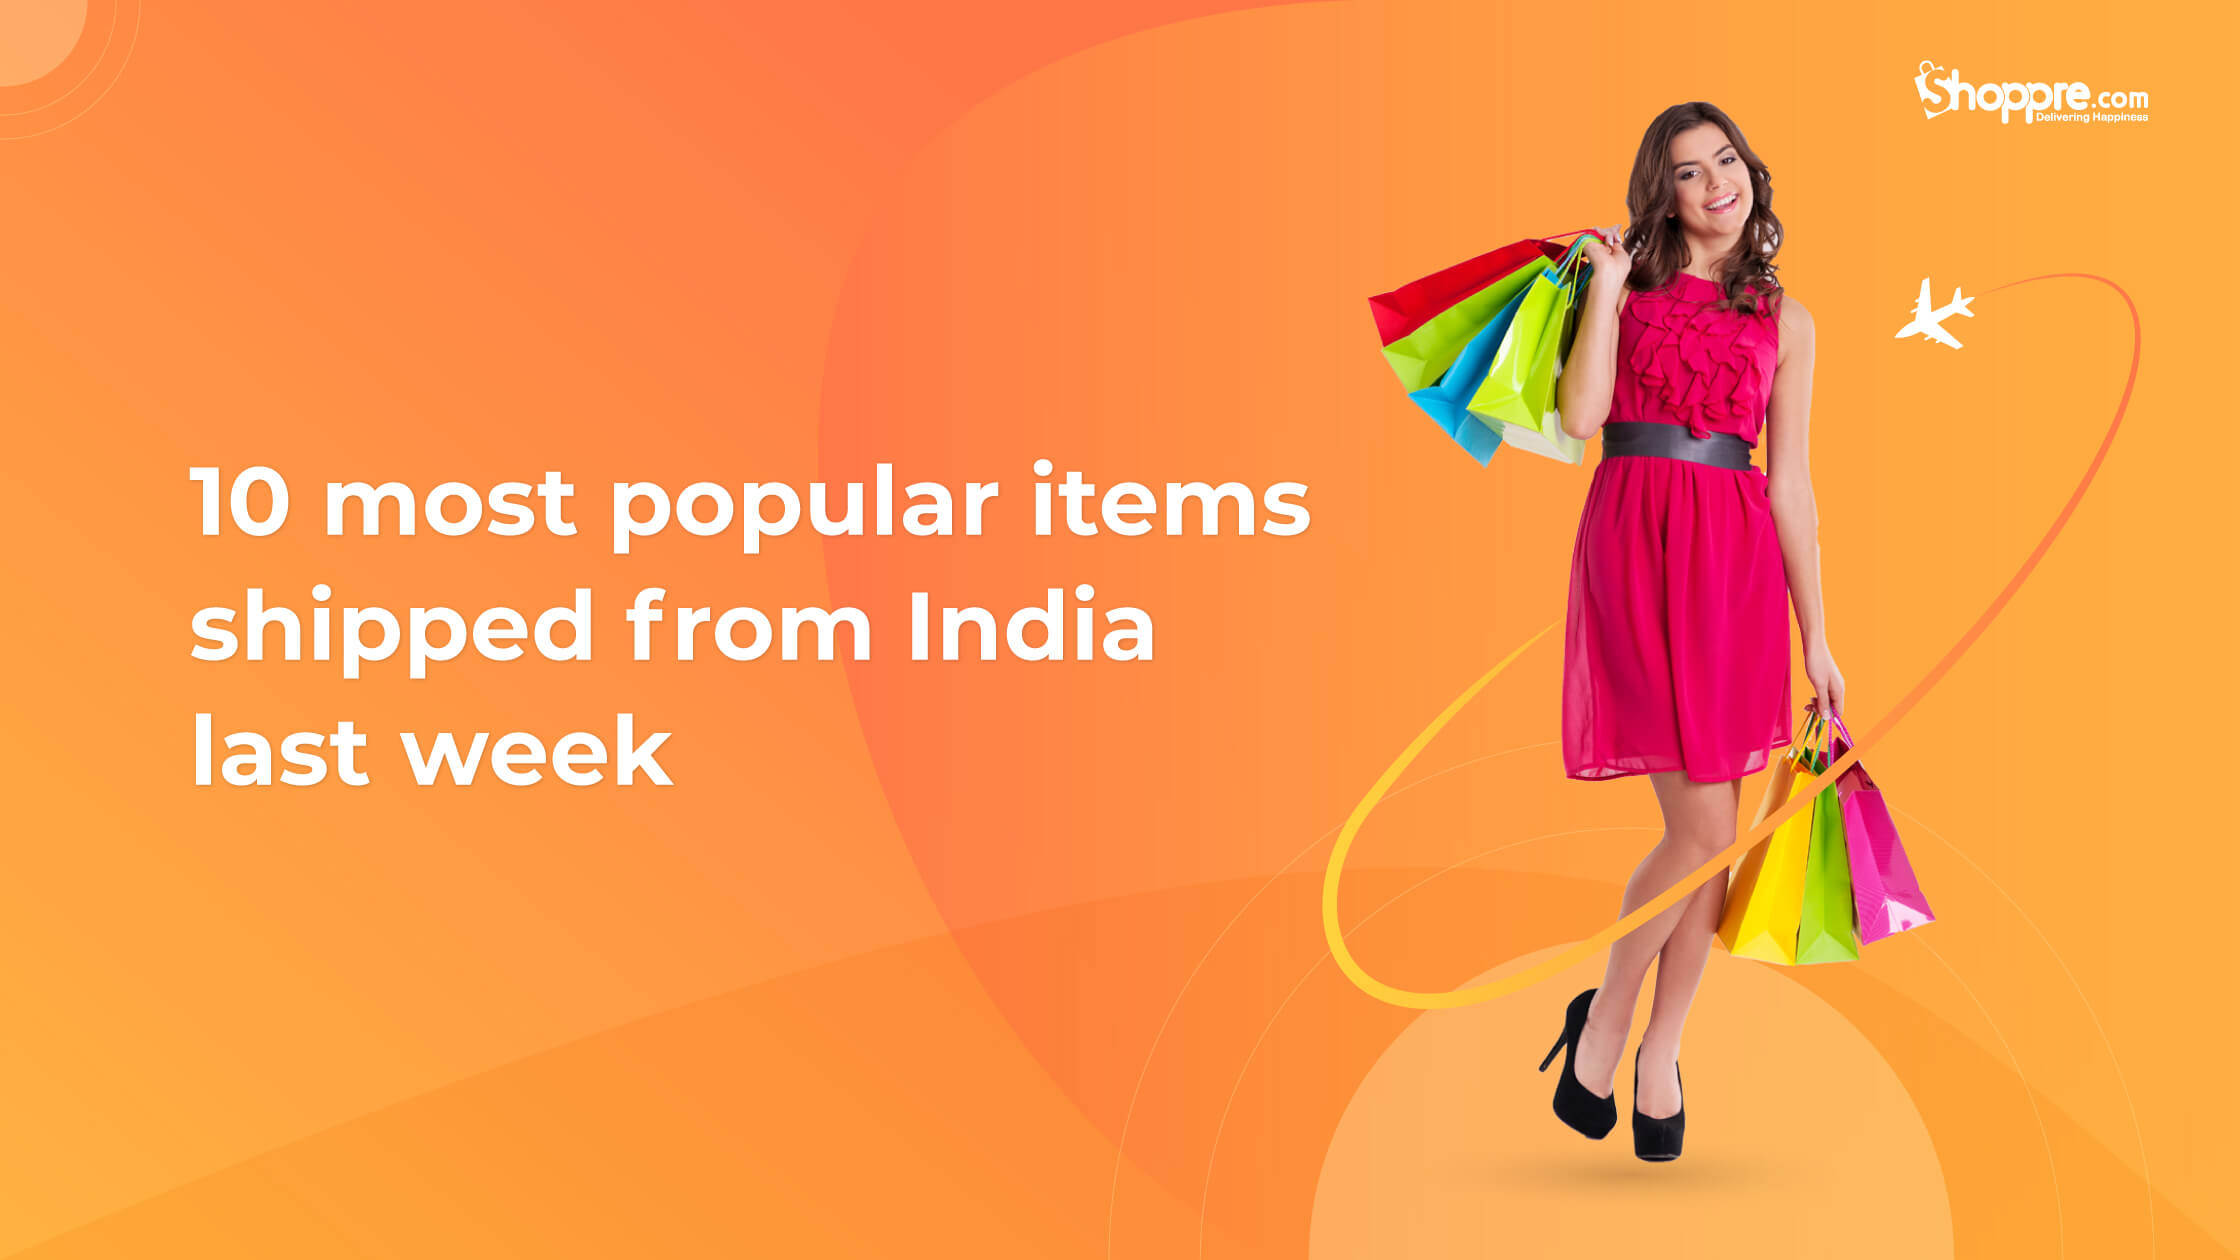 What are the top 10 selling products from India